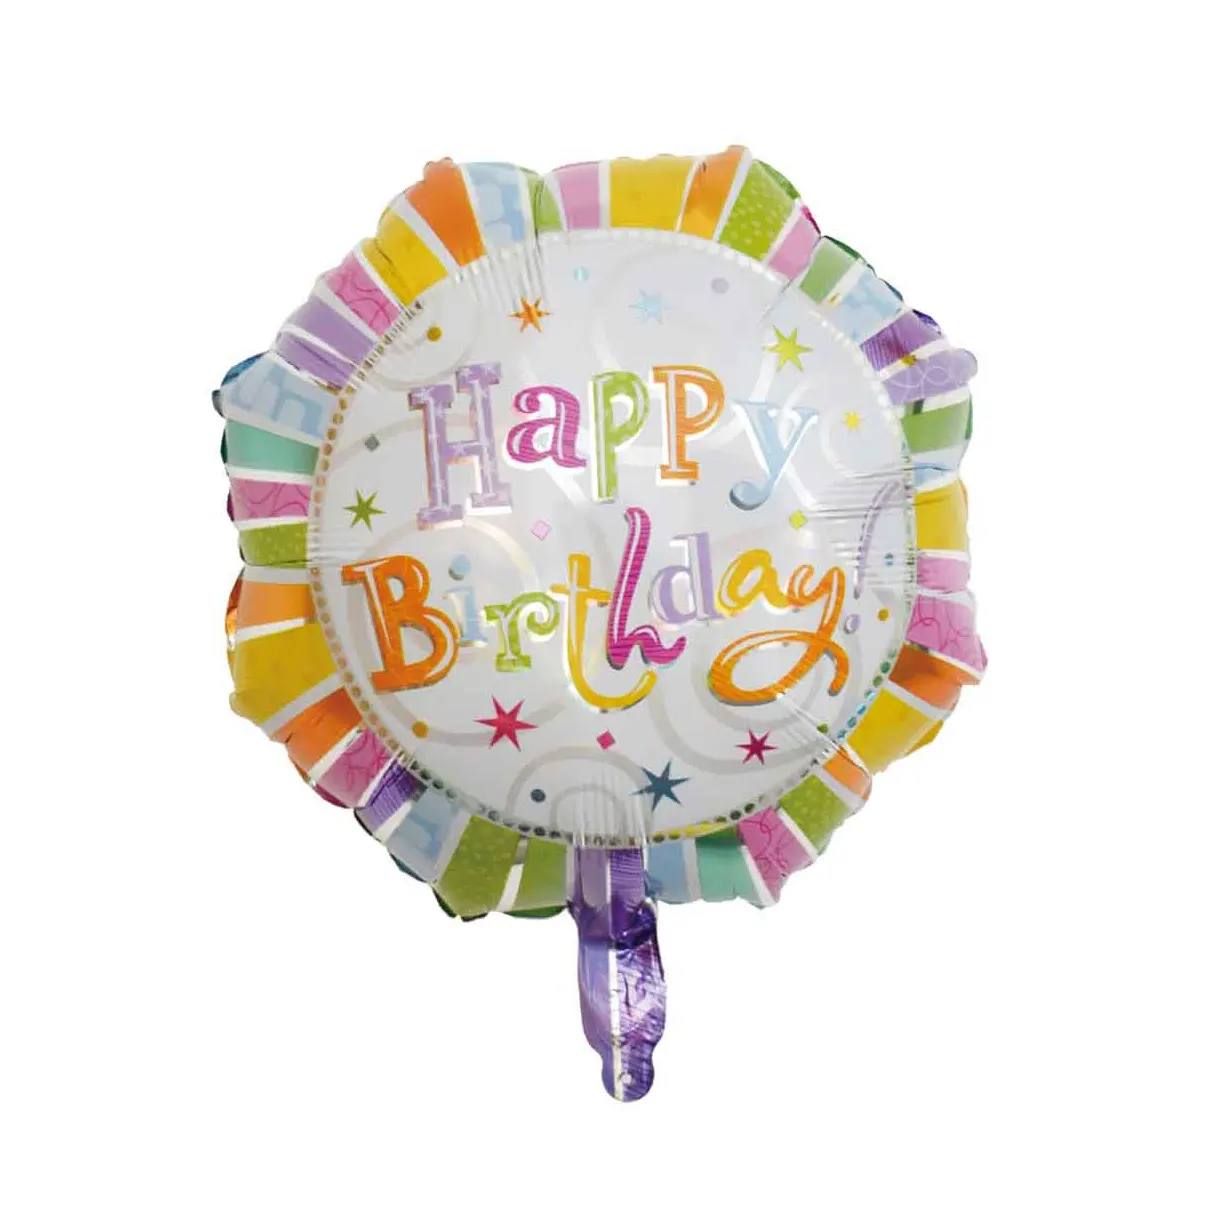 2022 Happy Birthday Aluminum Helium Foil Balloons Colorful Mylar Balloons Party Decoration